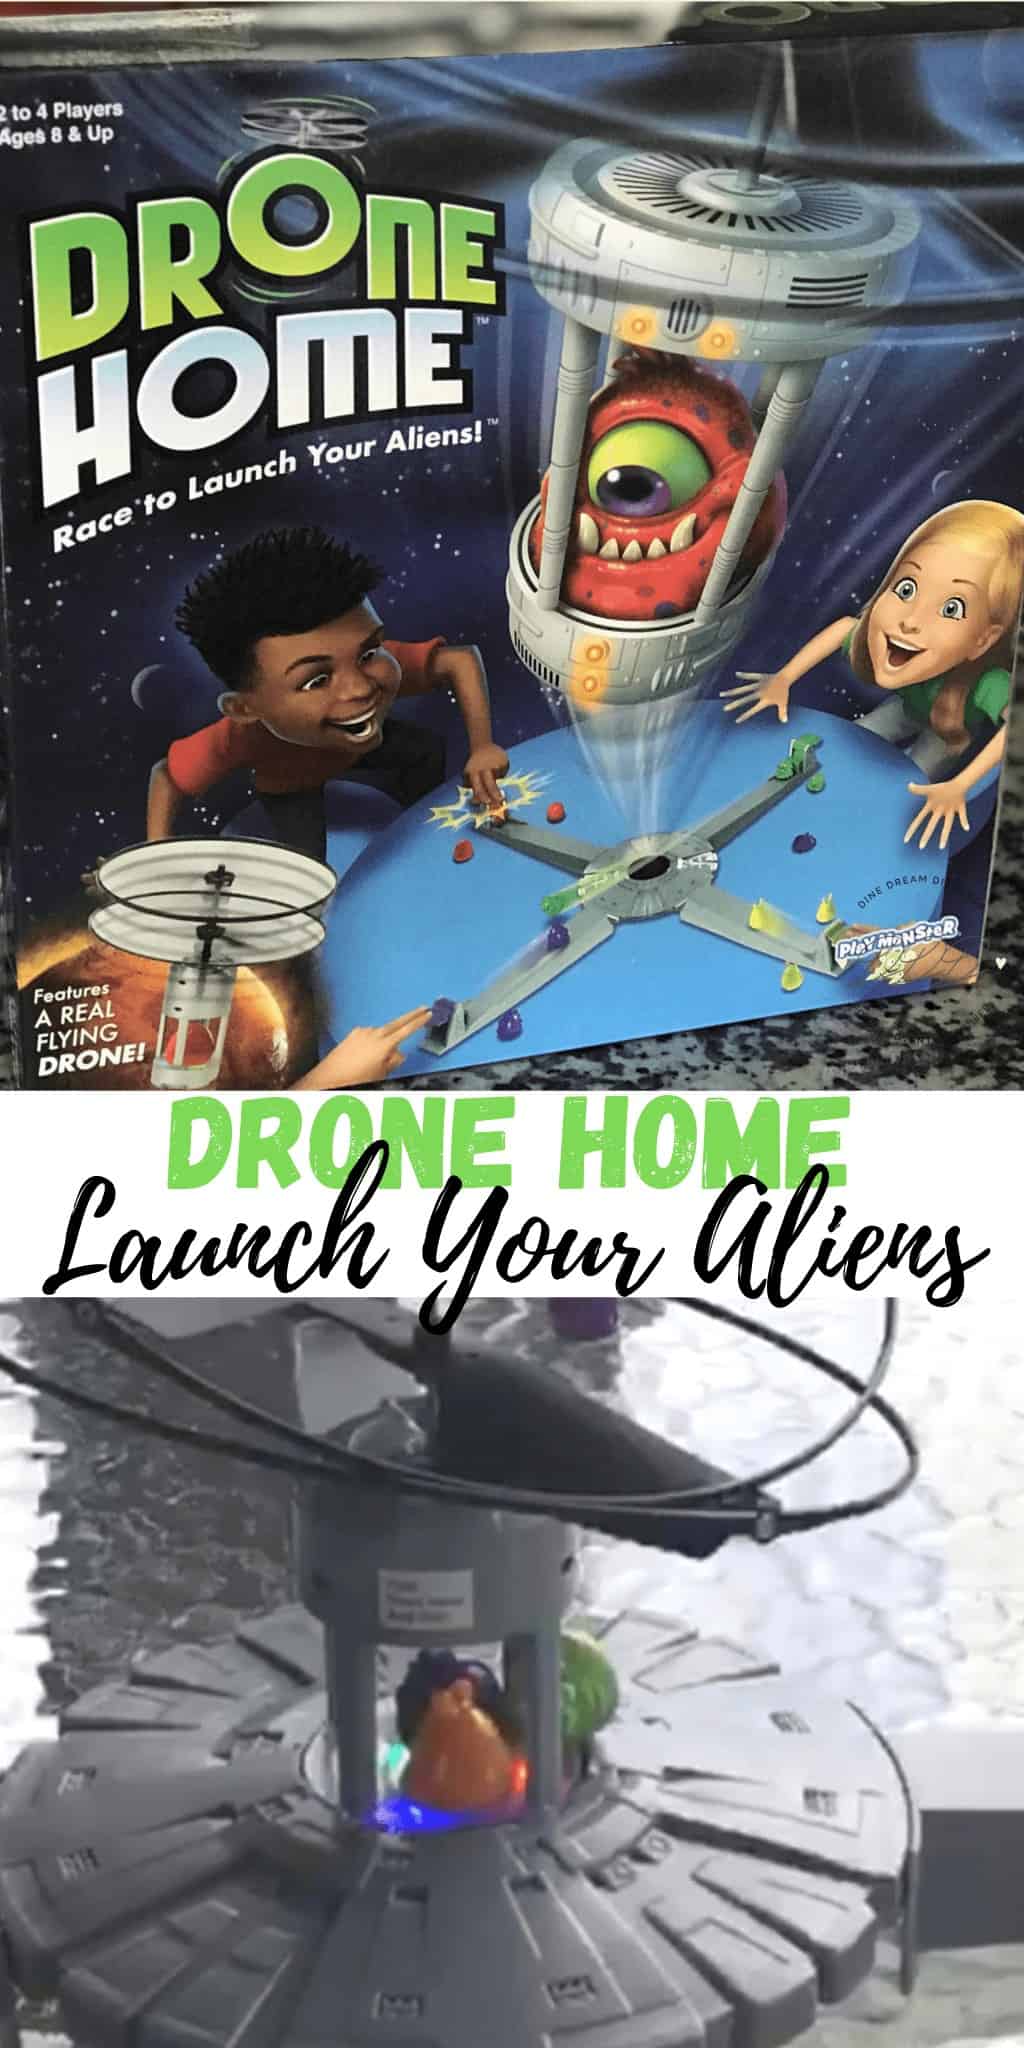 Launch Your Aliens in Drone Home